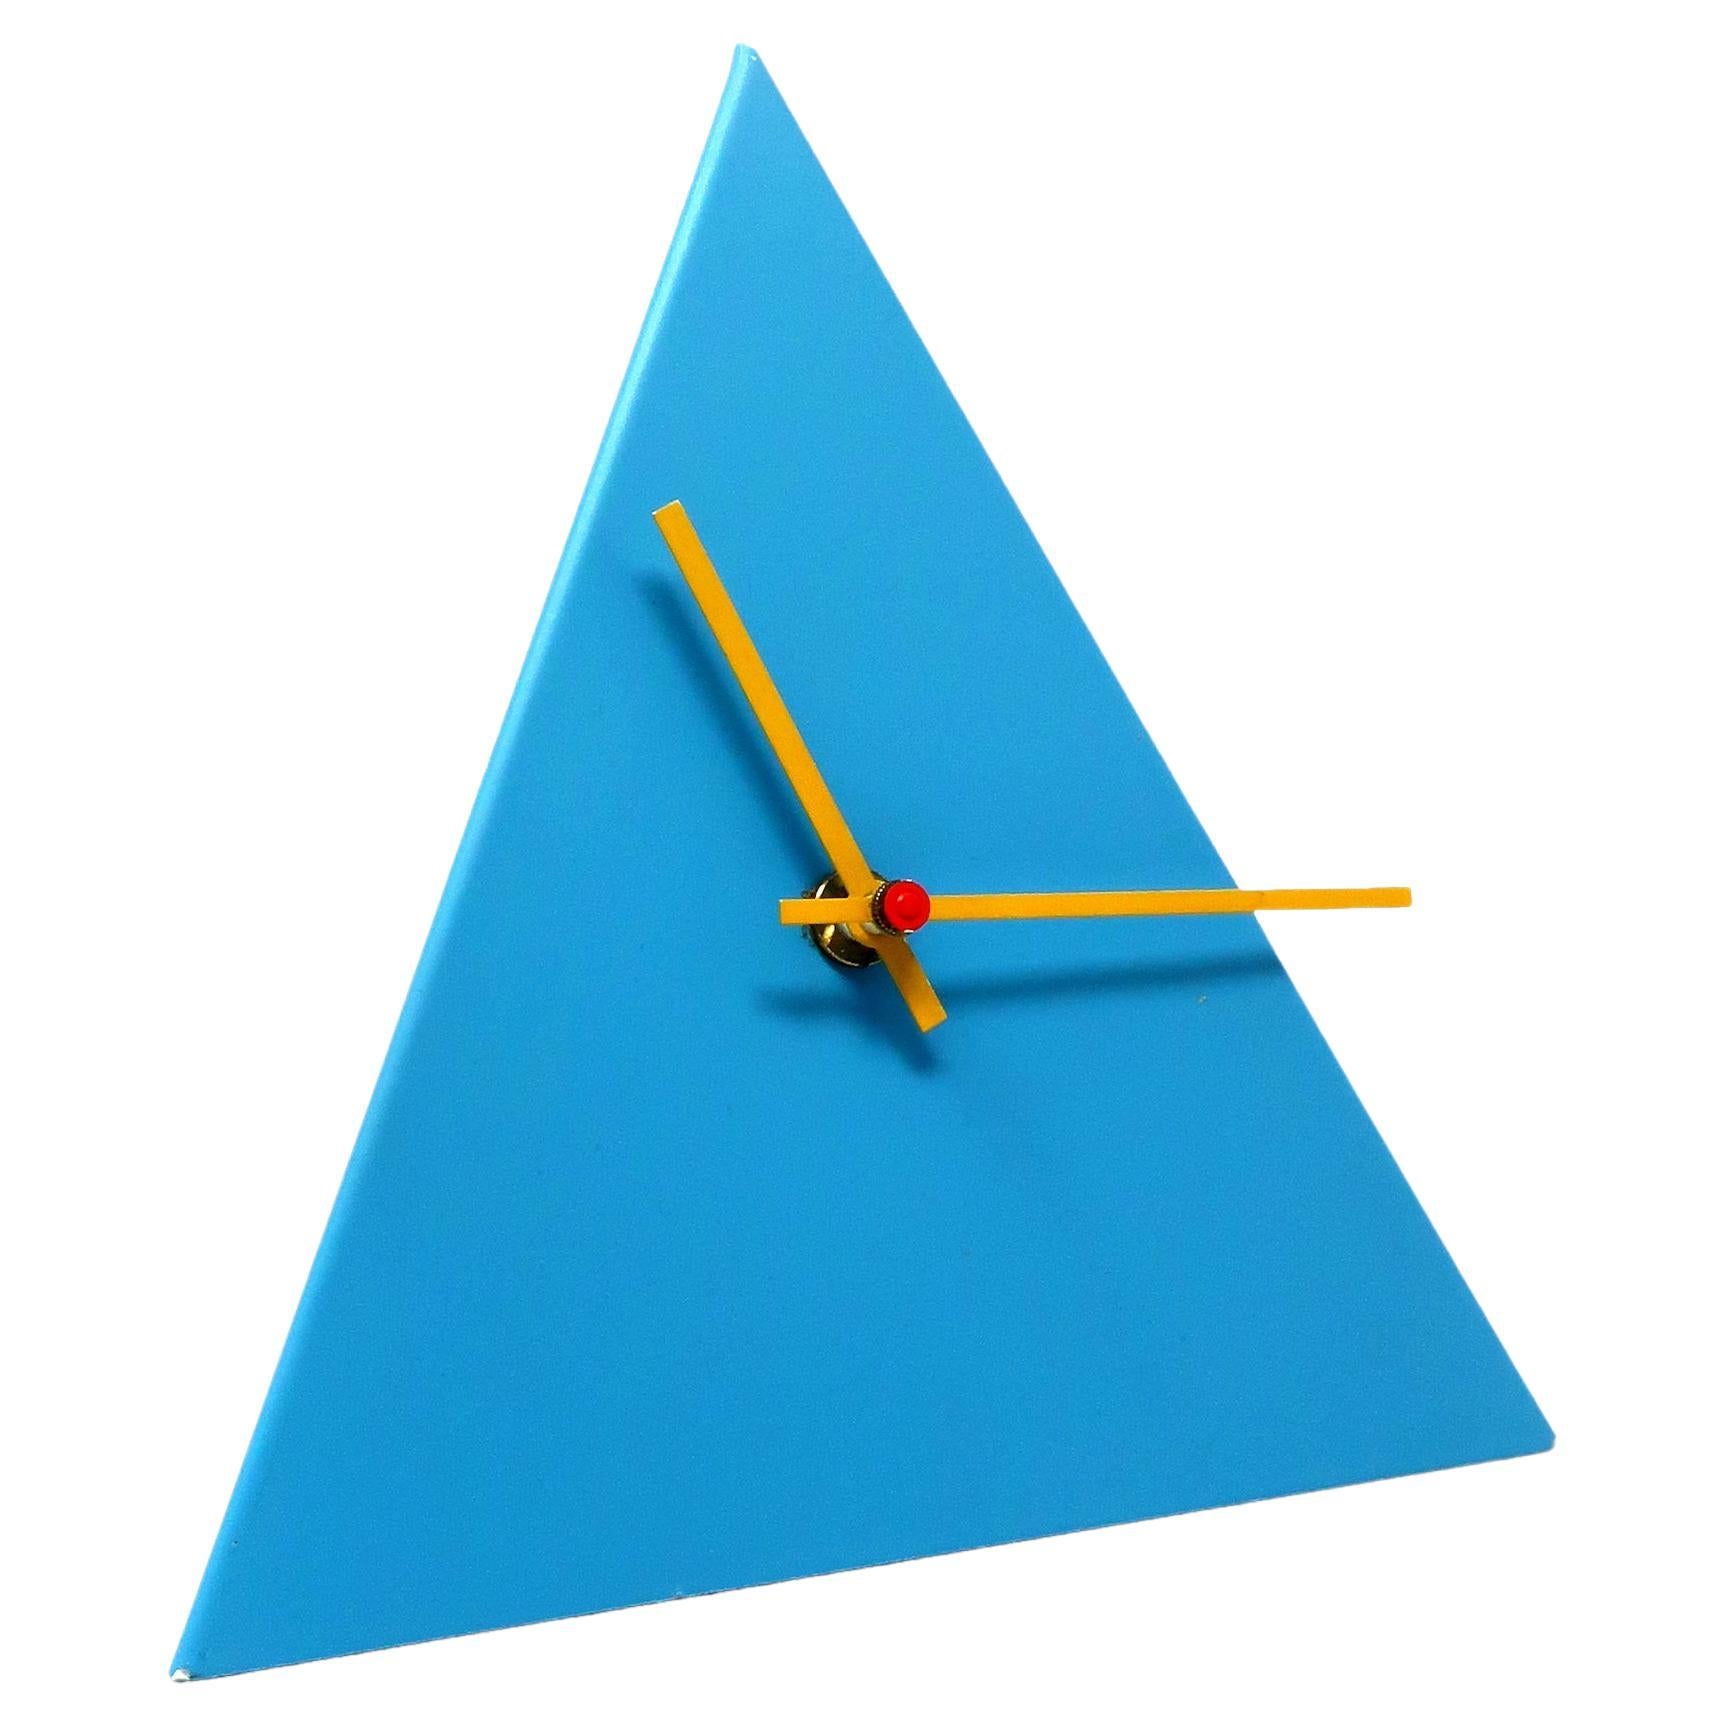 1980s Blue and Yellow Metal Desk Clock by Time Square For Sale at ...